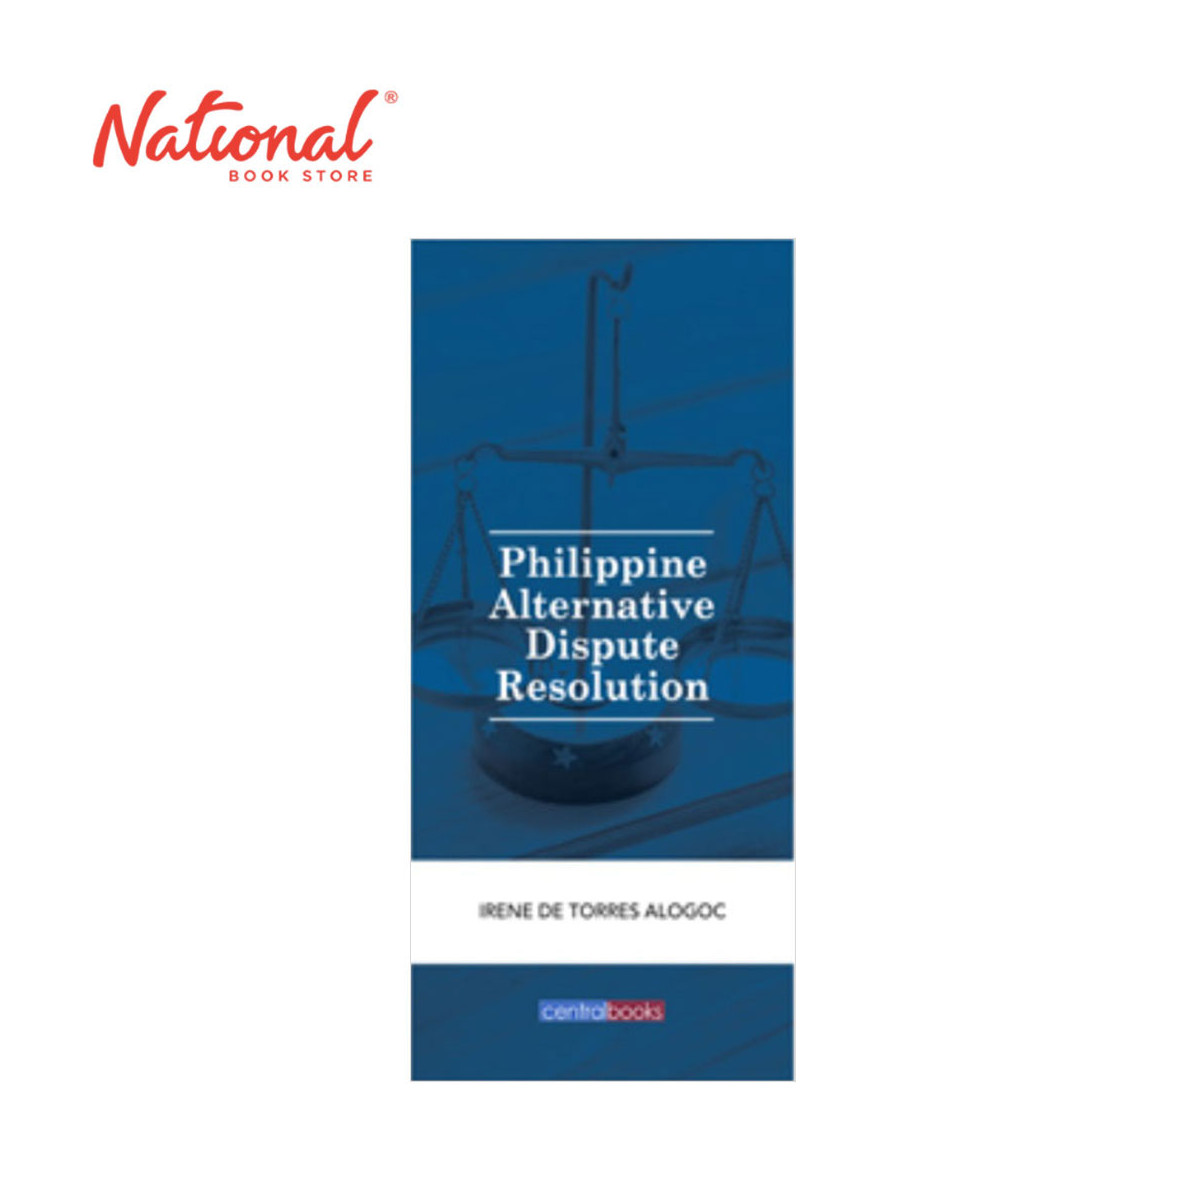 *SPECIAL ORDER* Philippine Alternative Dispute Resolution (2021) by Atty. Irene De Torres-Alogoc - Hardcover - Law Books